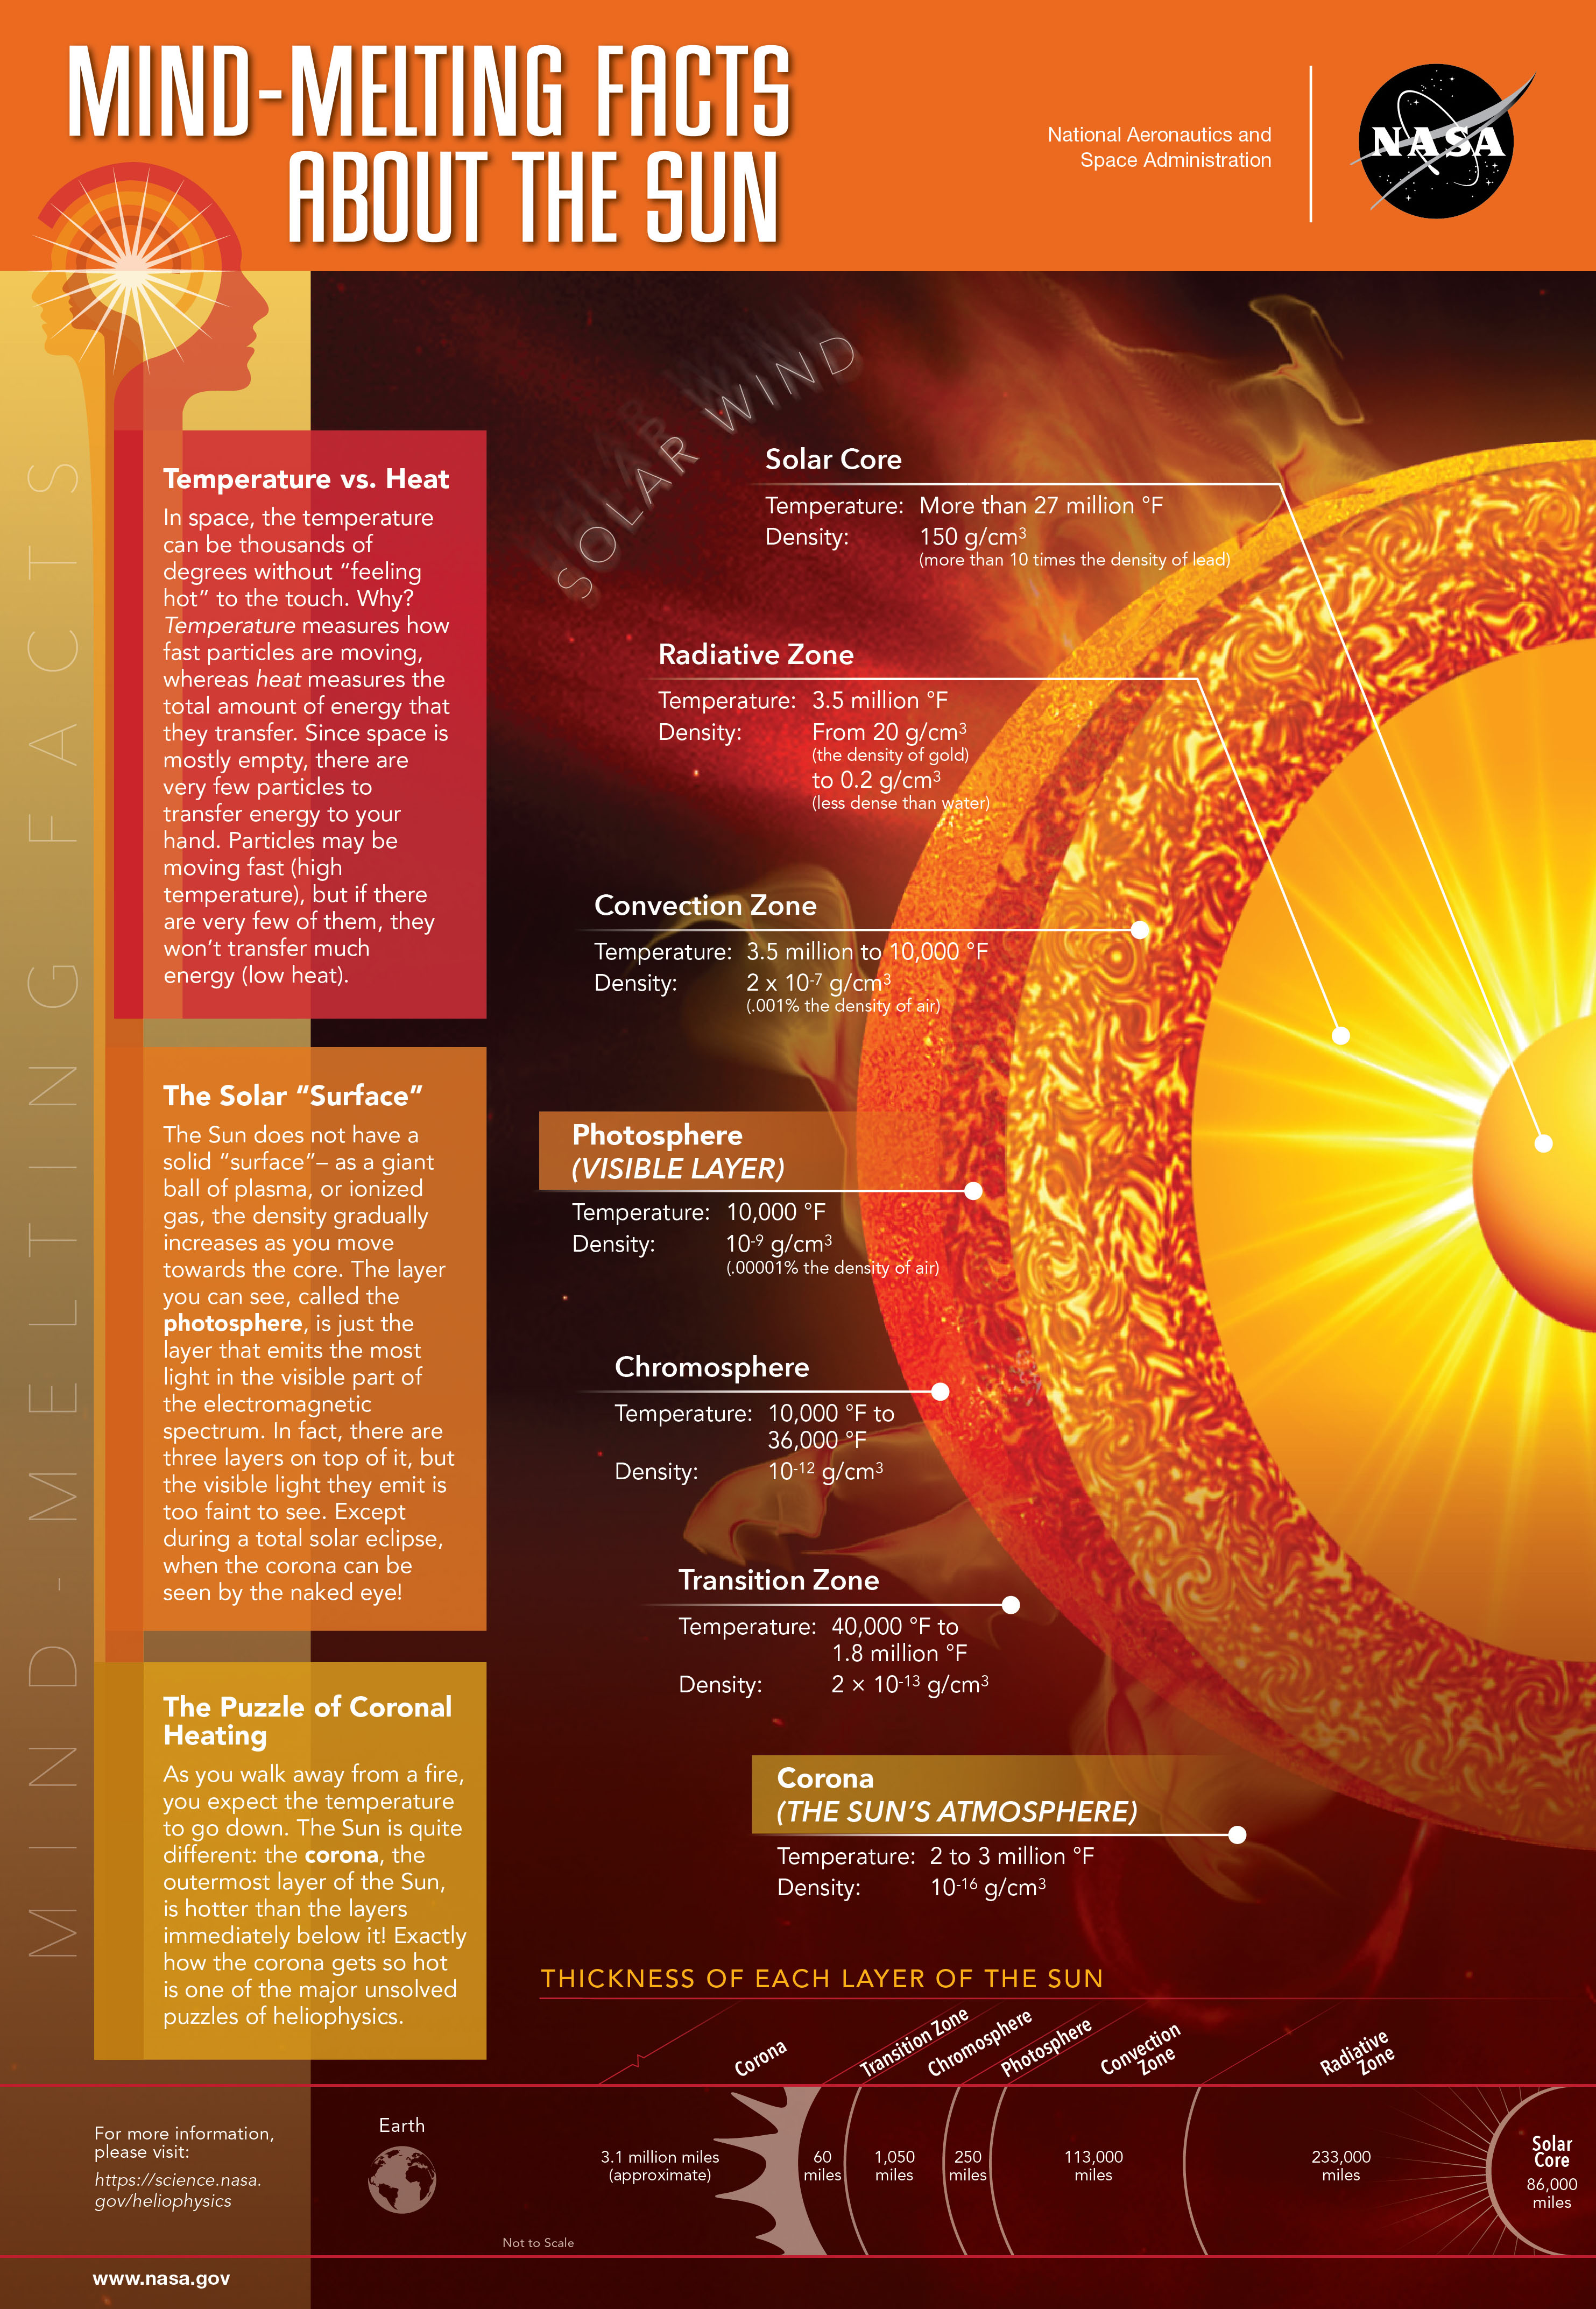 Mind-Melting Facts about the Sun, Credit: NASA